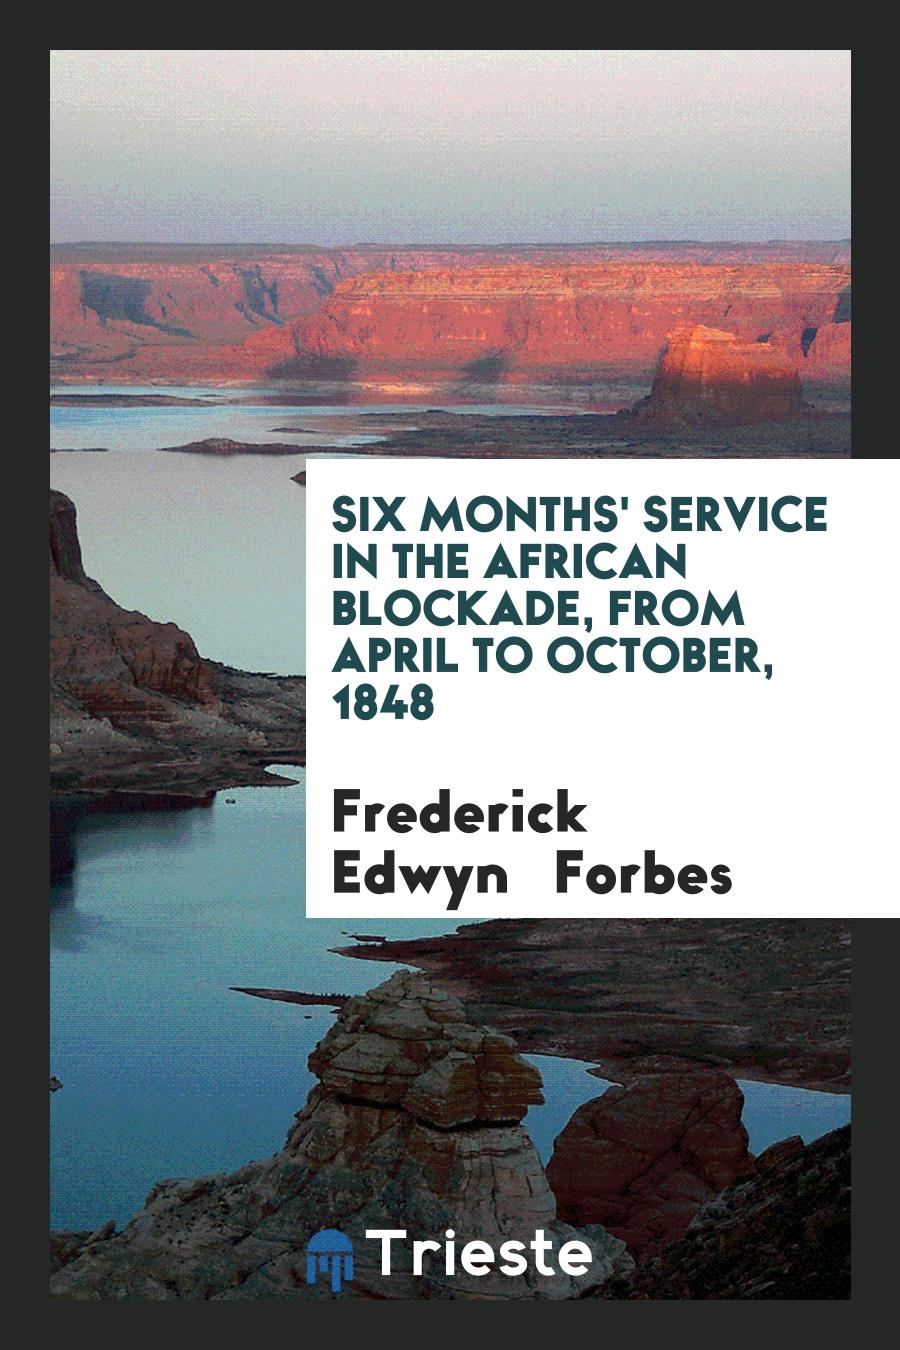 Six Months' Service in the African Blockade, from April to October, 1848